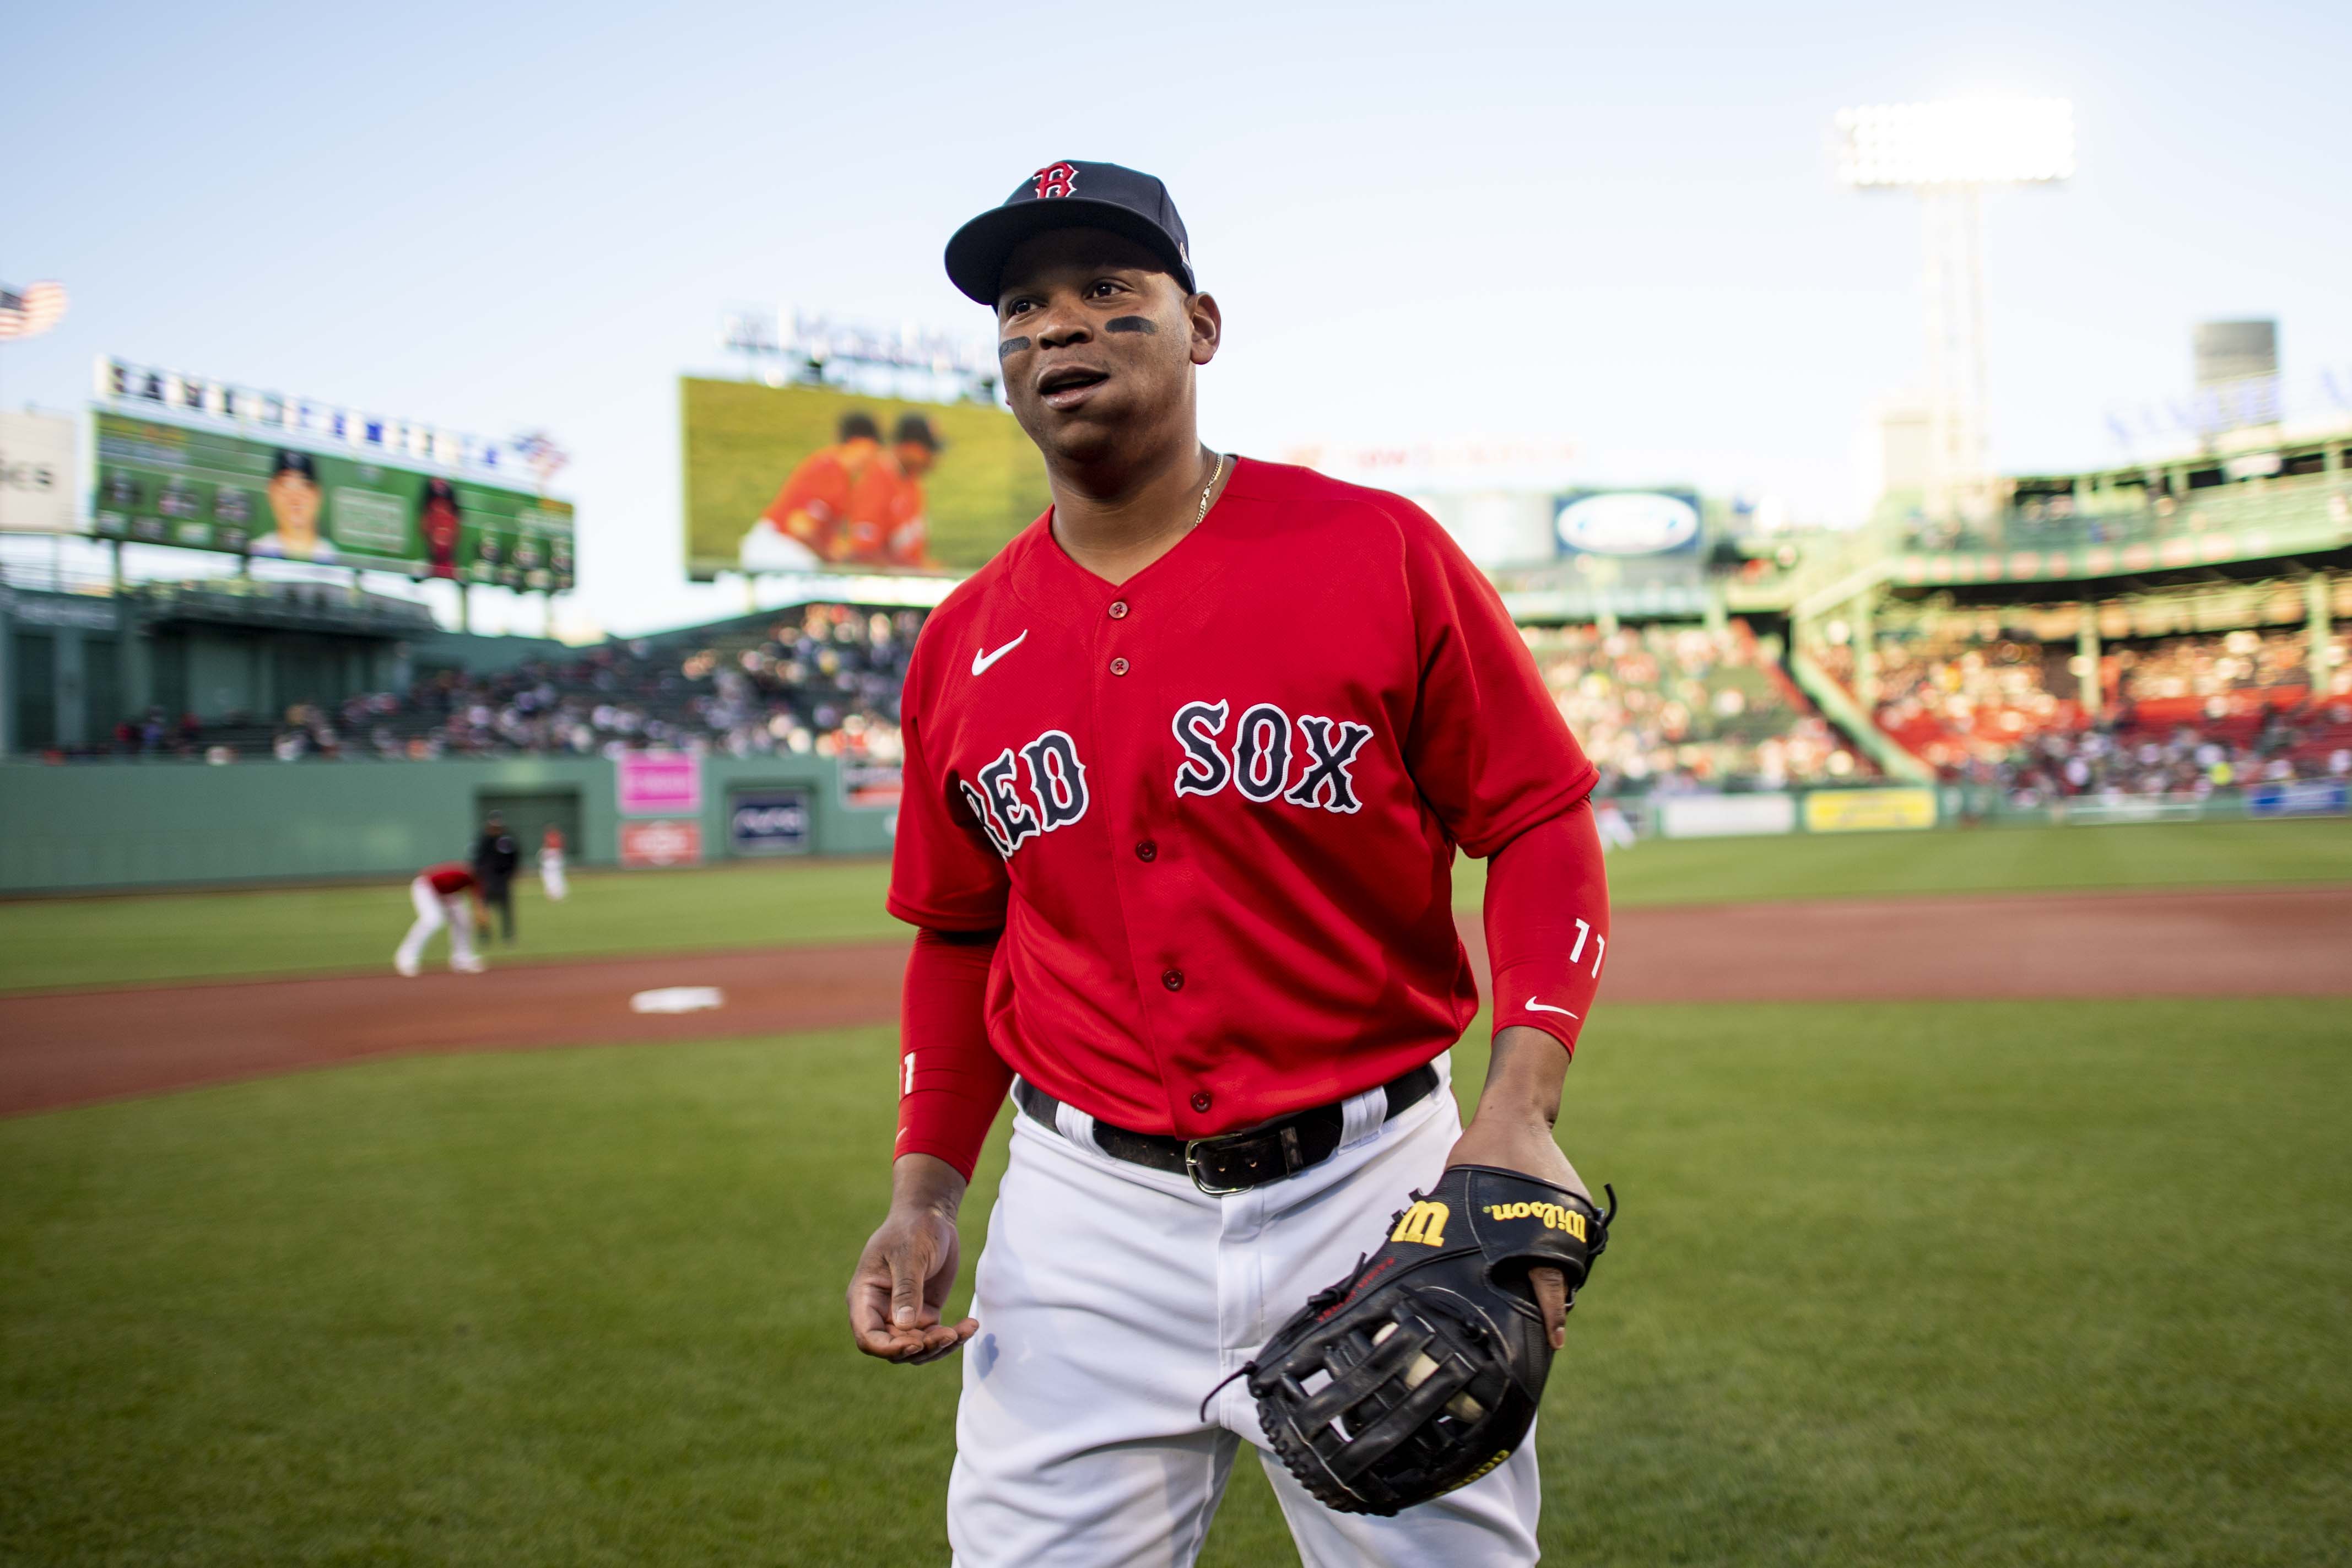 Rafael Devers of the Boston Red Sox stands on the field during a game  News Photo - Getty Images